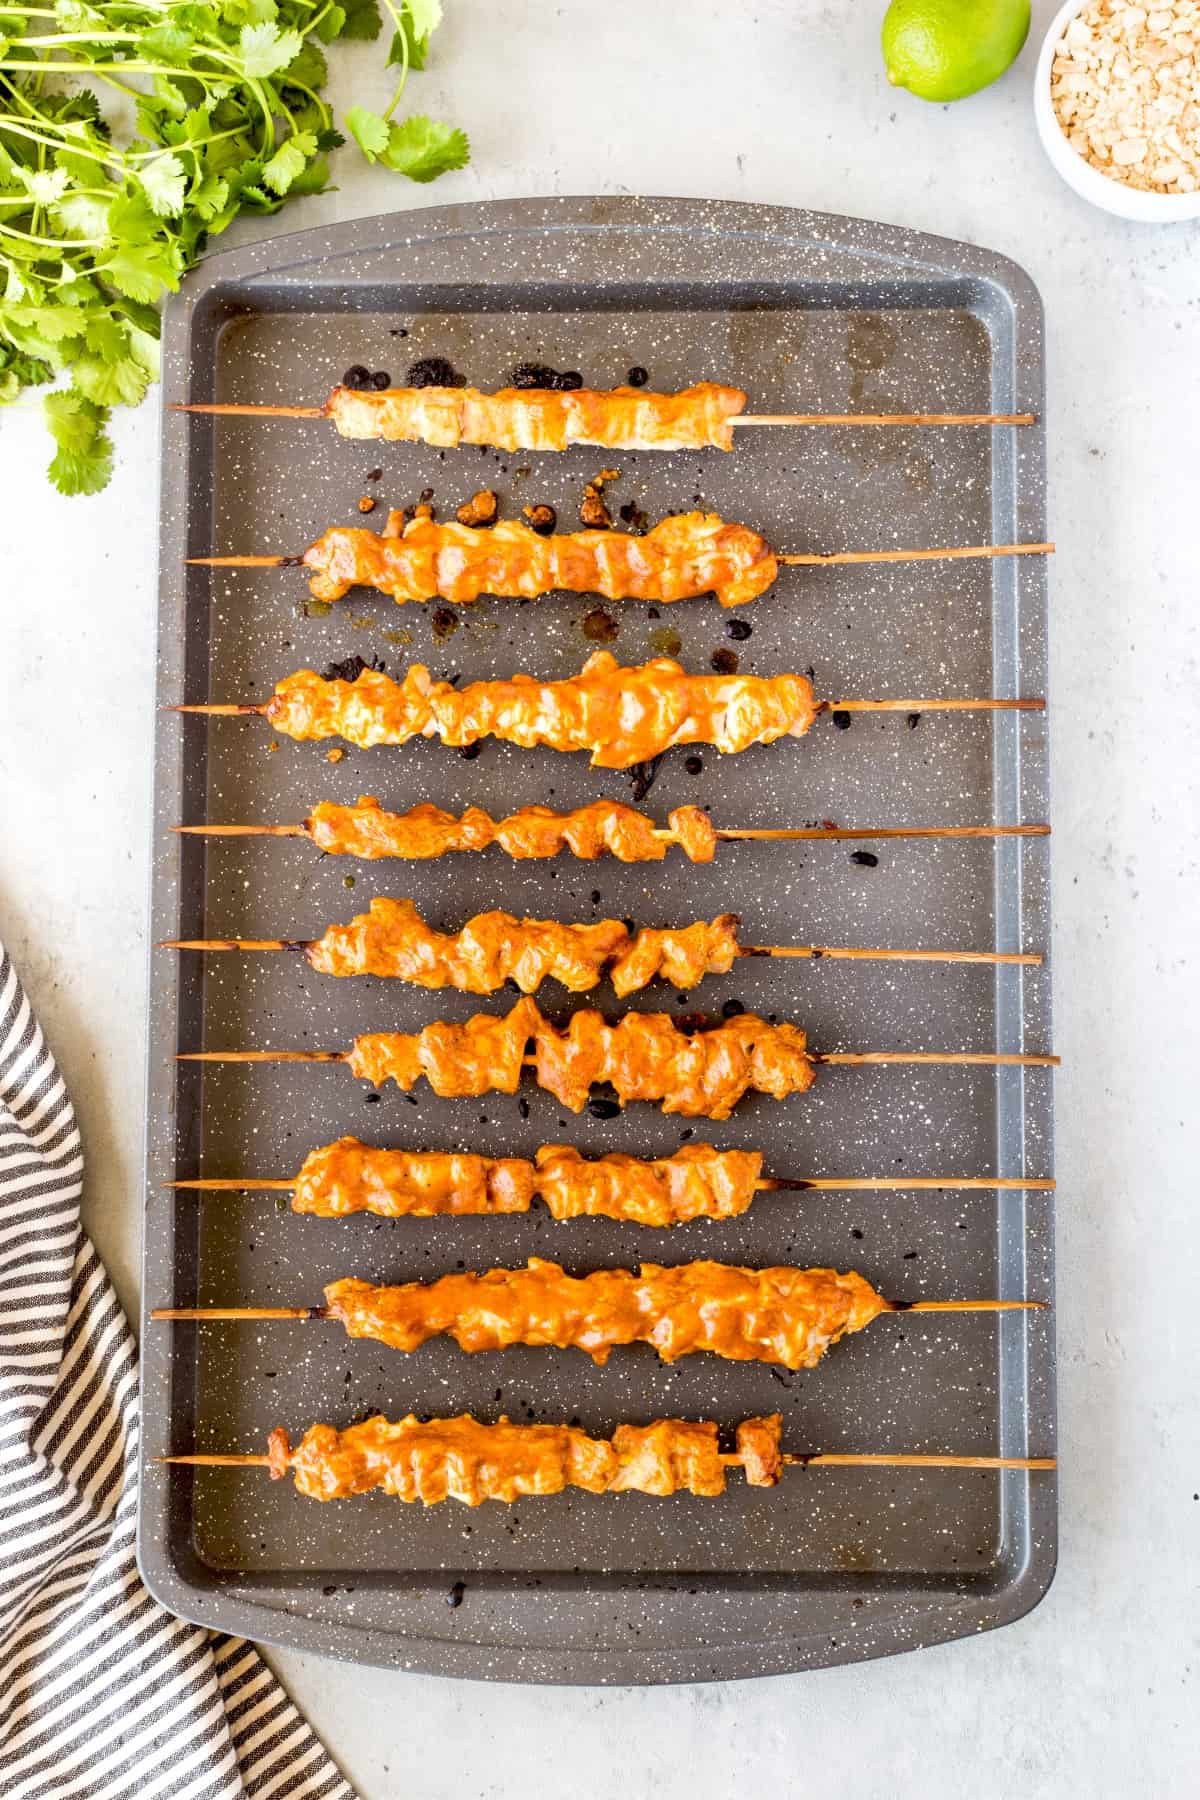 Cooked chicken satay on a baking sheet